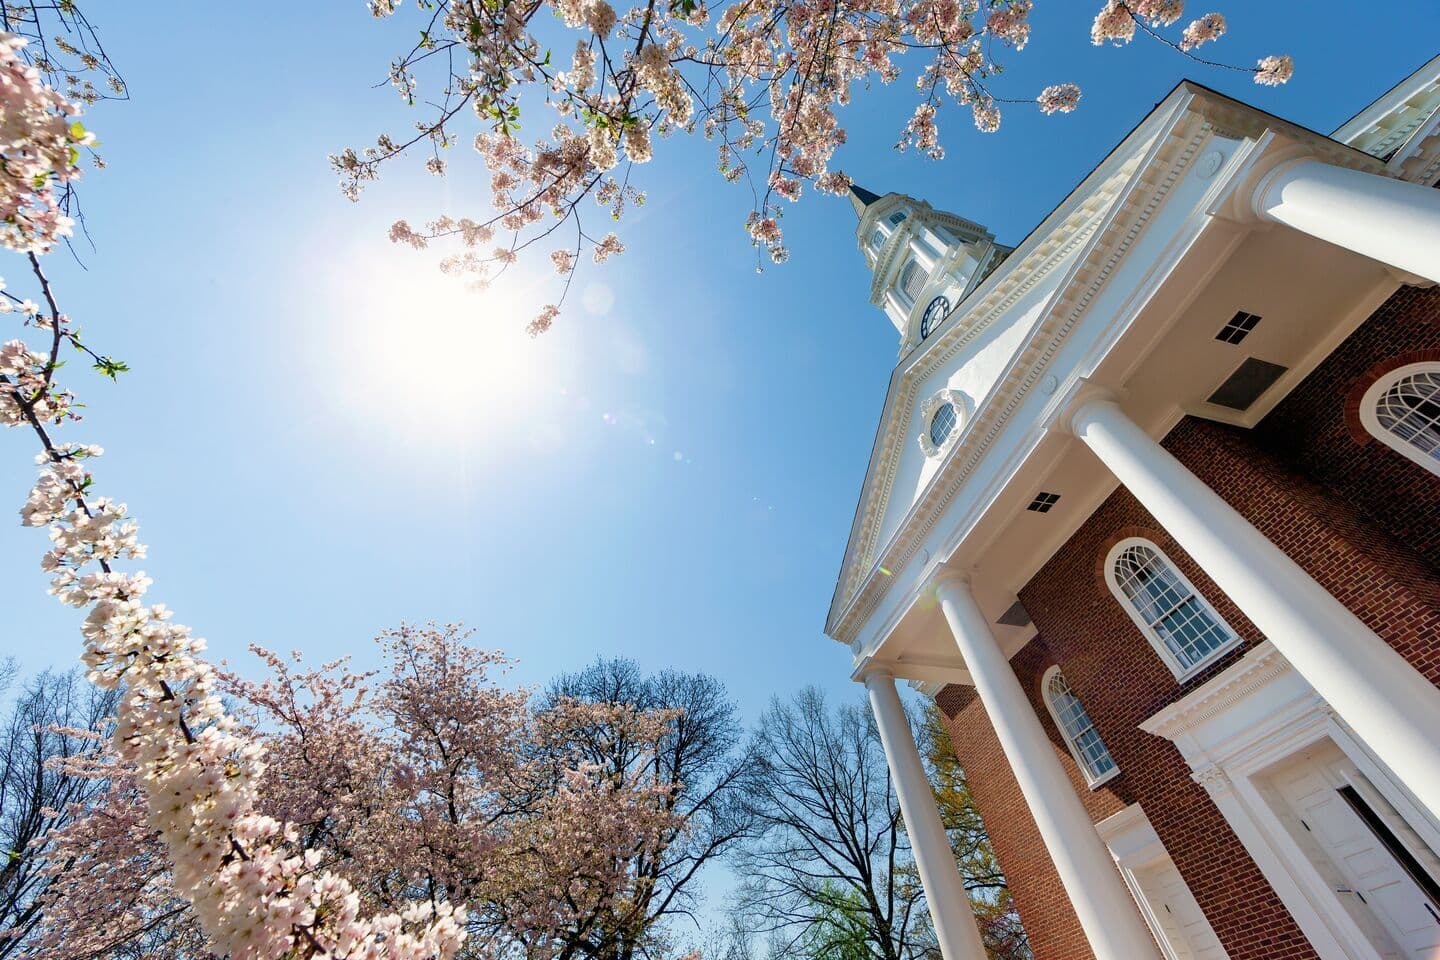 View of Memorial Chapel looking up from the ground through cherry blossoms with a blue sky.